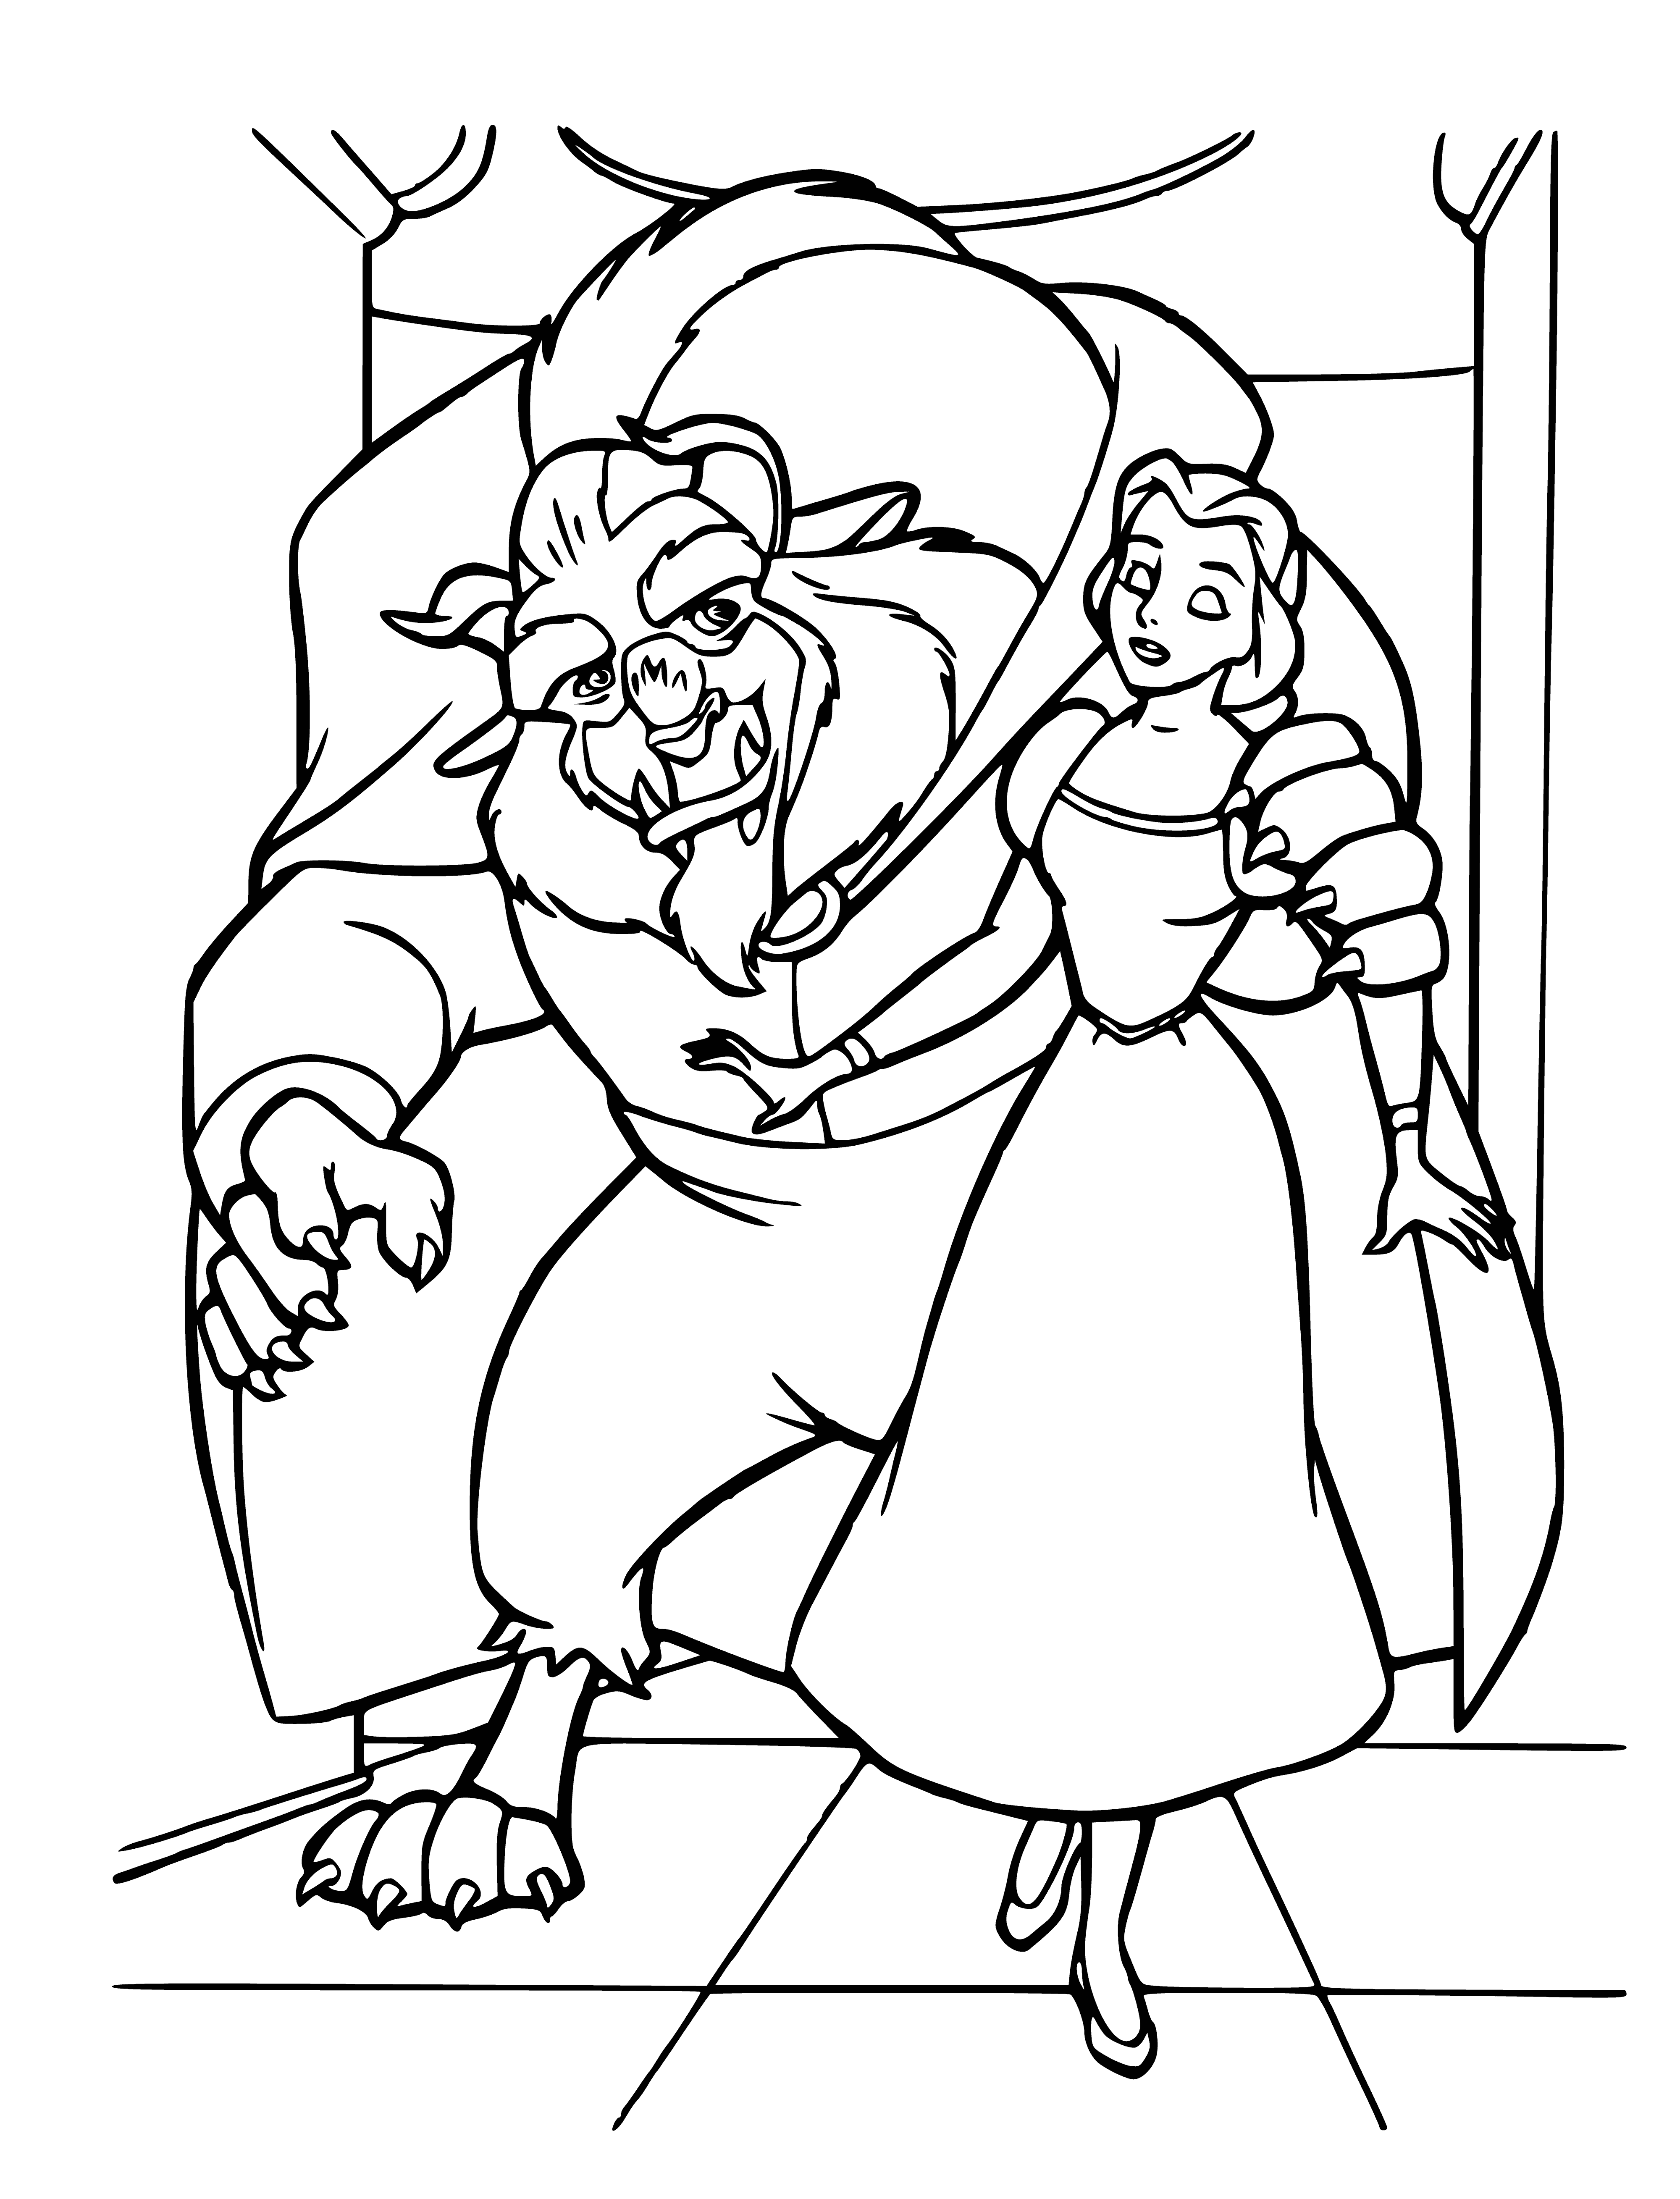 coloring page: Belle stands in front of a growling Beast, holding a red rose. #BeautyAndTheBeast